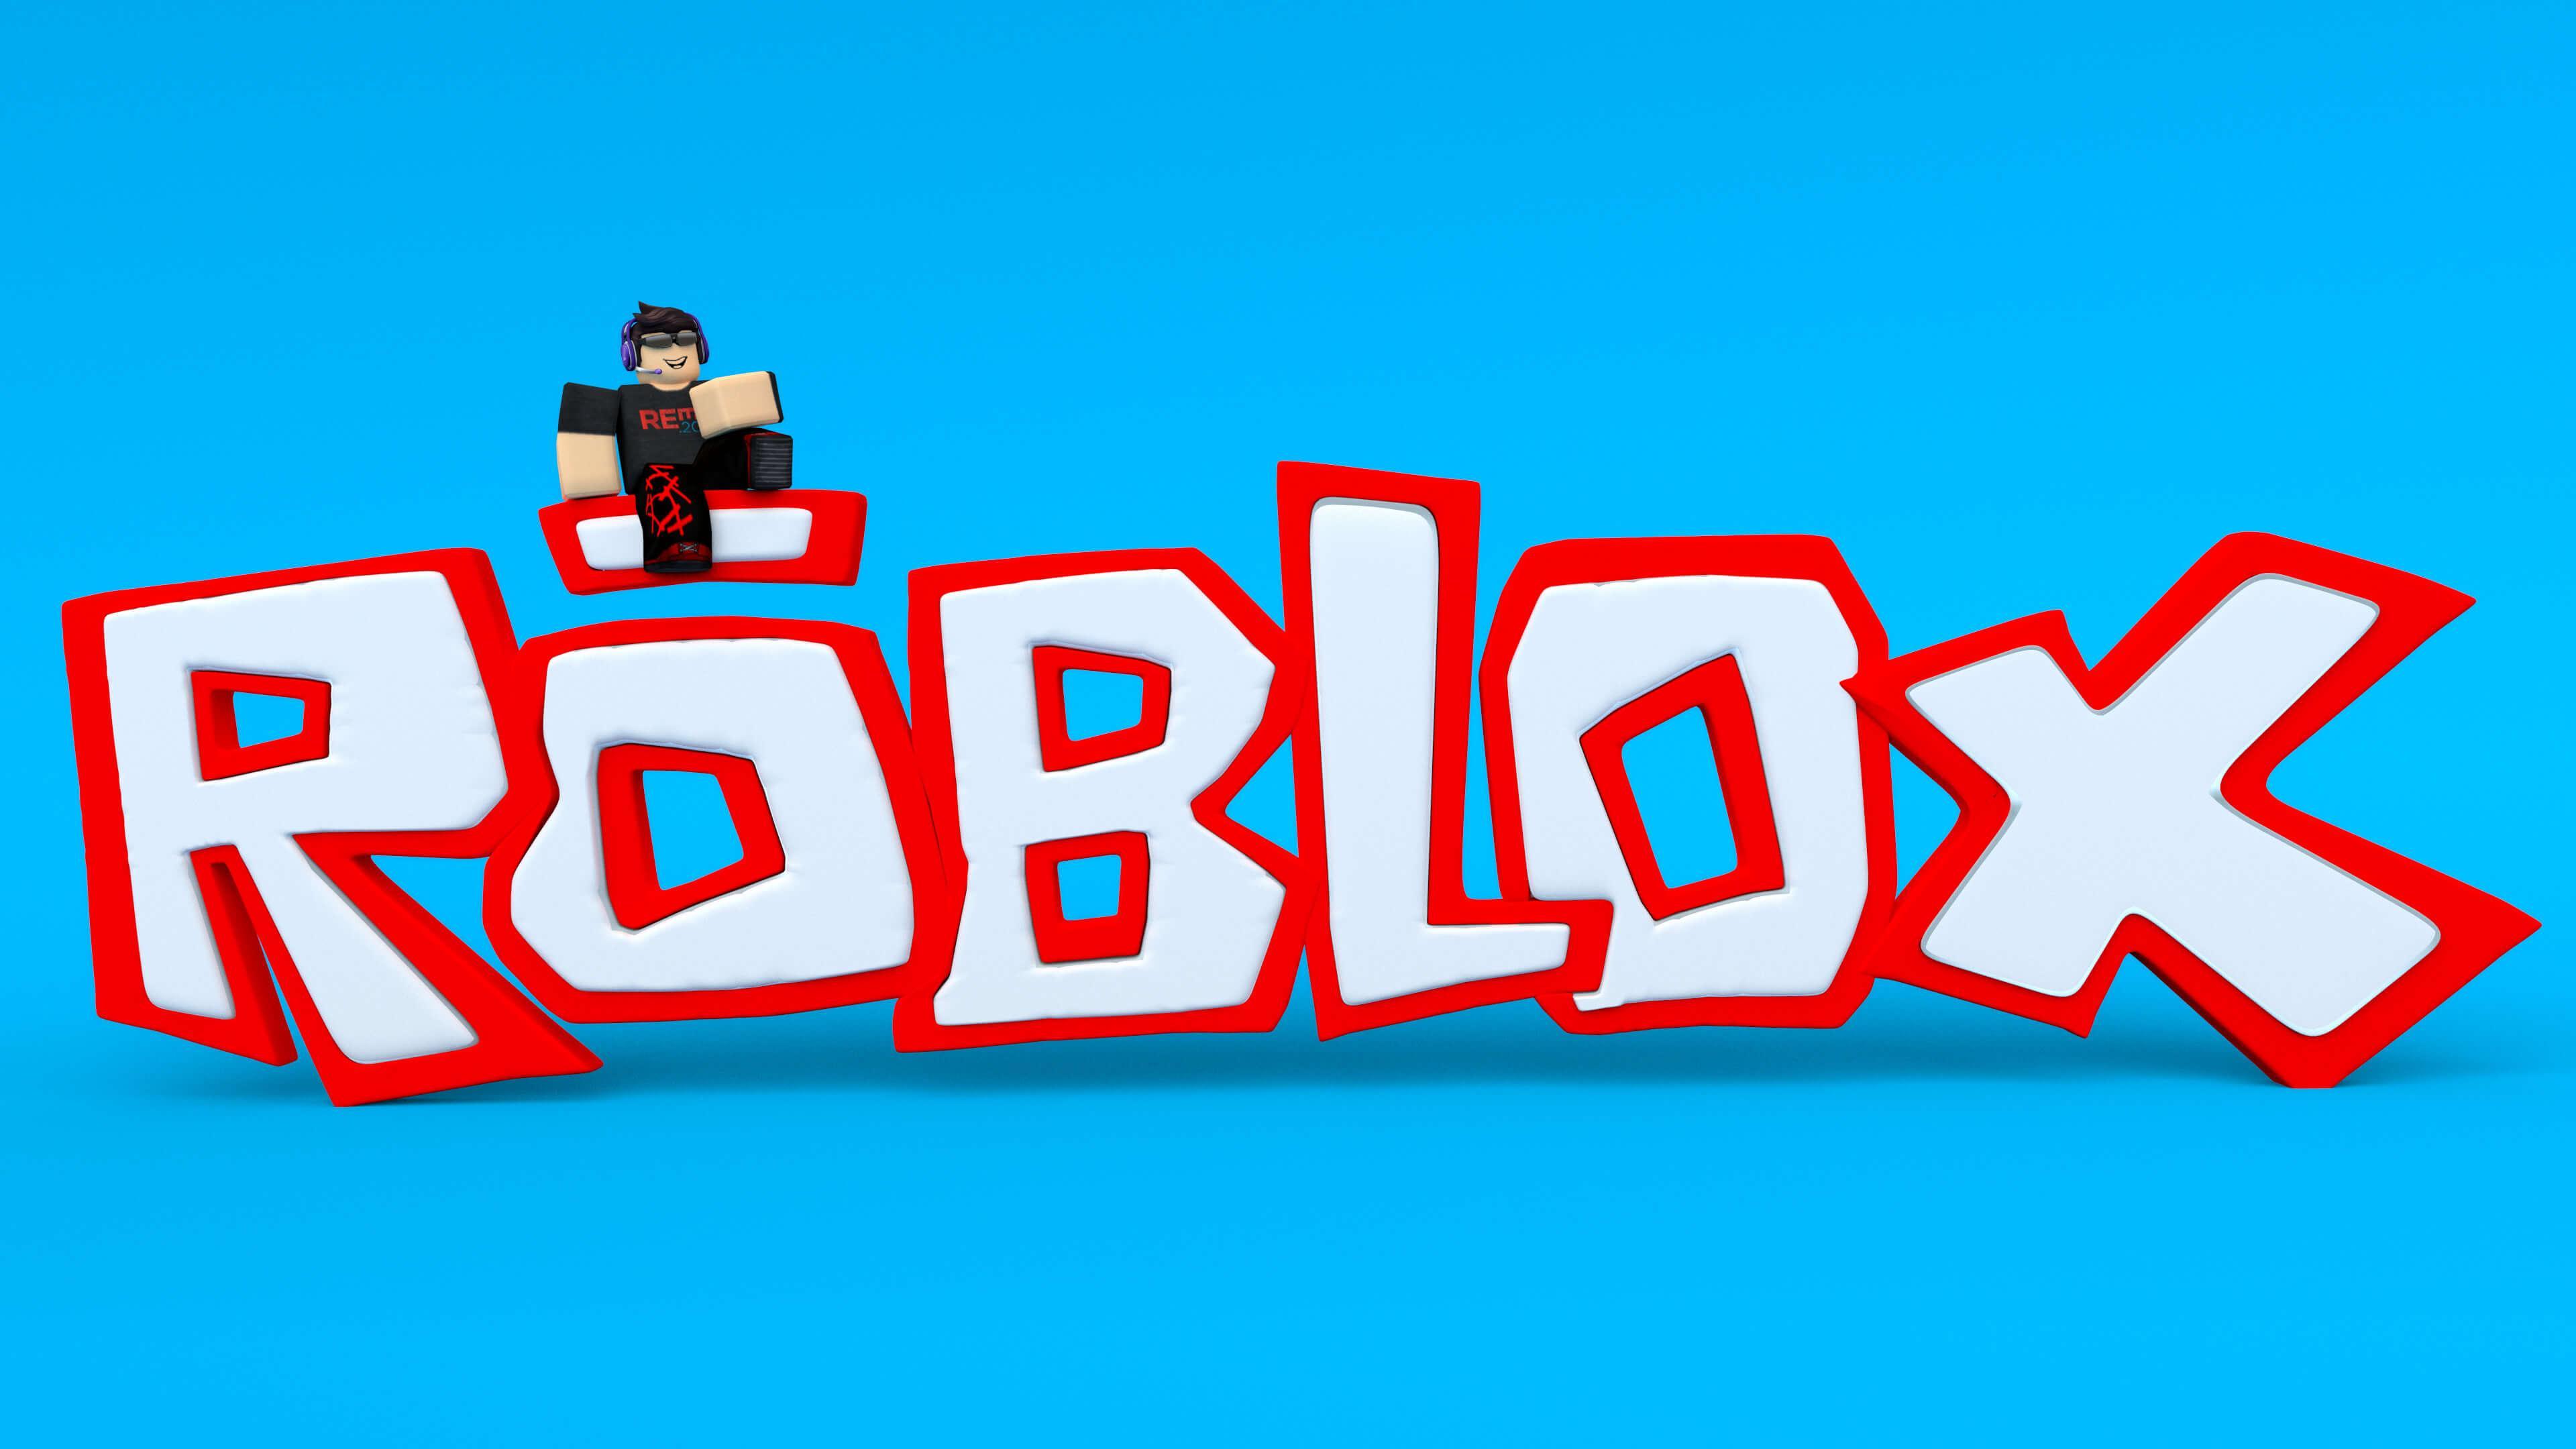 Wallpapers Rblx Rblx Game Free Wallpapers For Android Apk Download - roblox rblx